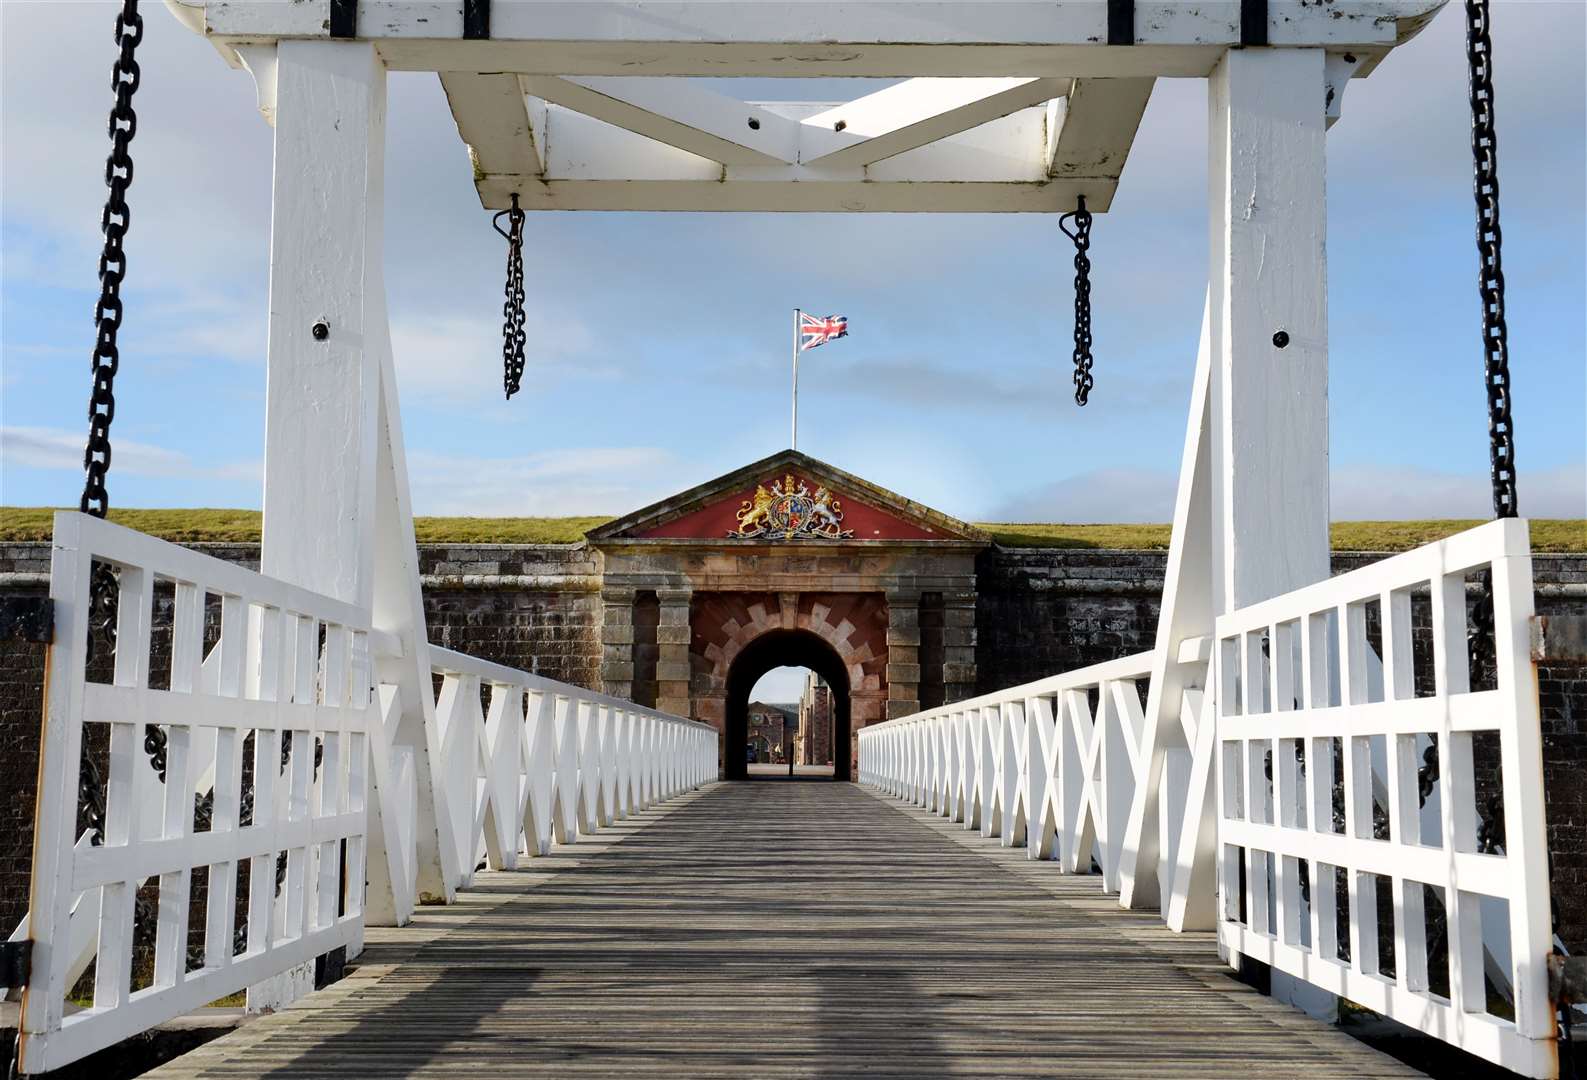 An imposing entrance to 275-year-old Fort George.